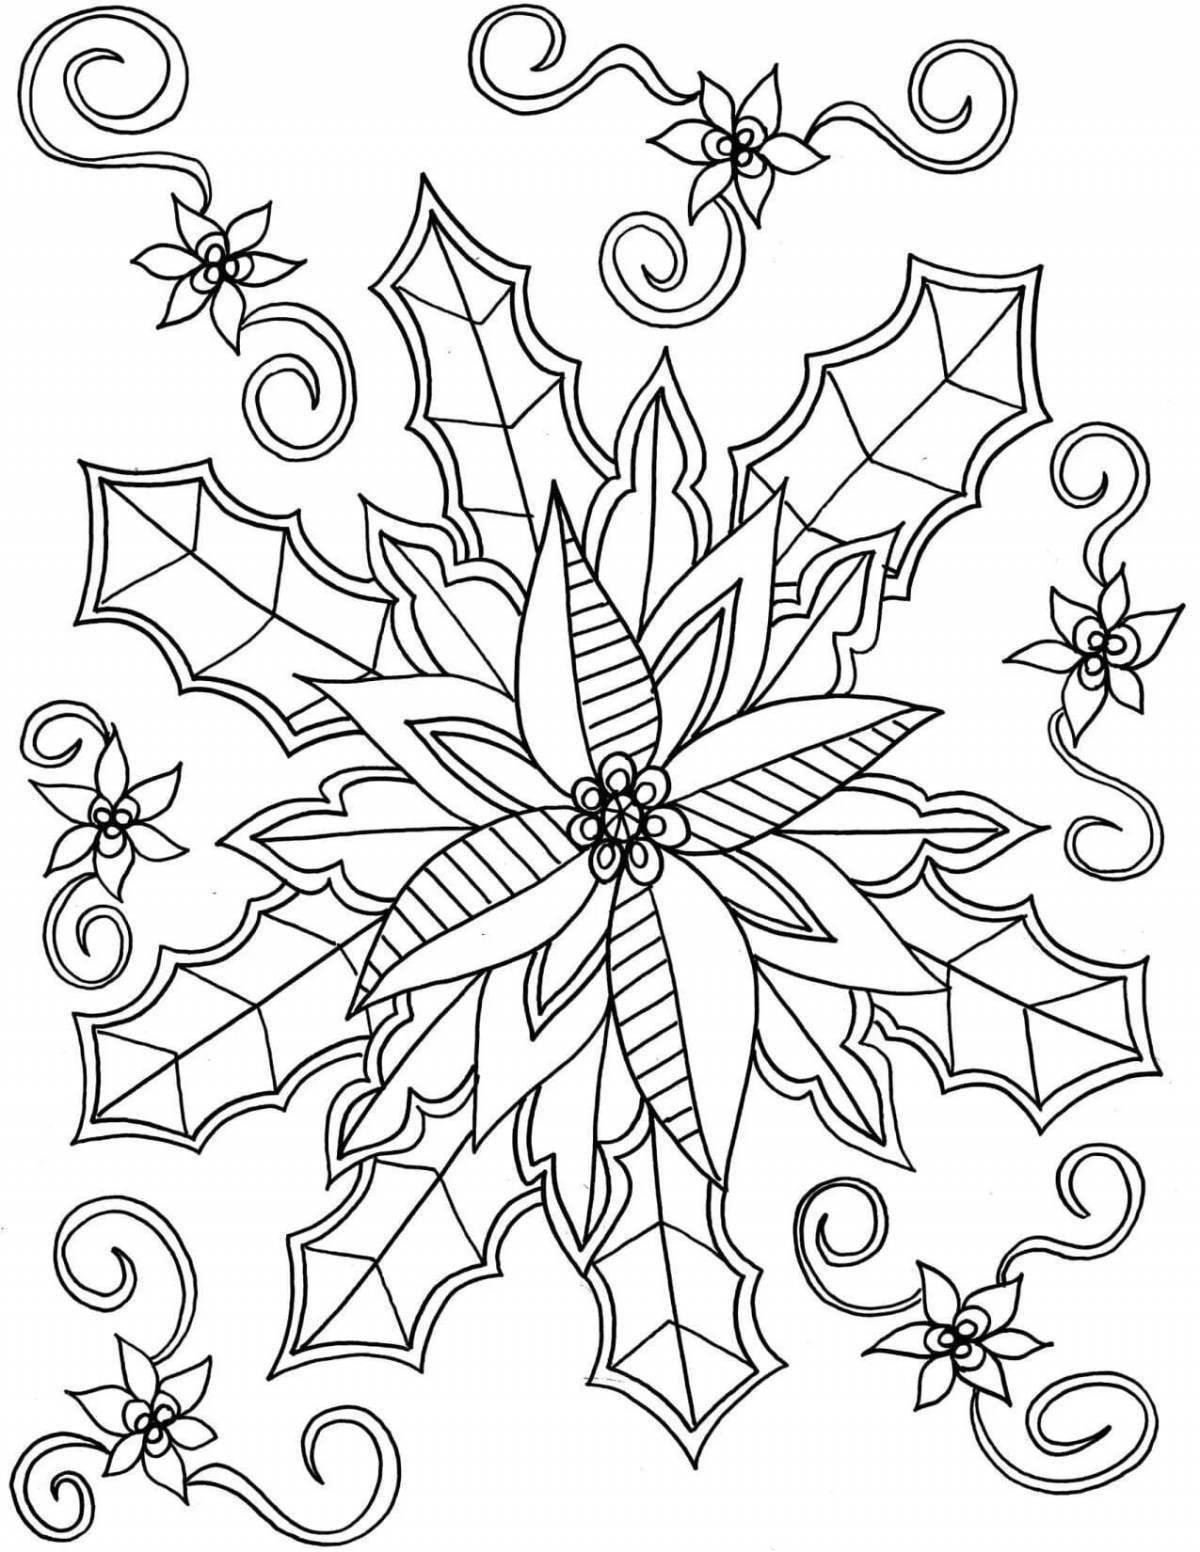 Glowing Christmas flowers coloring pages